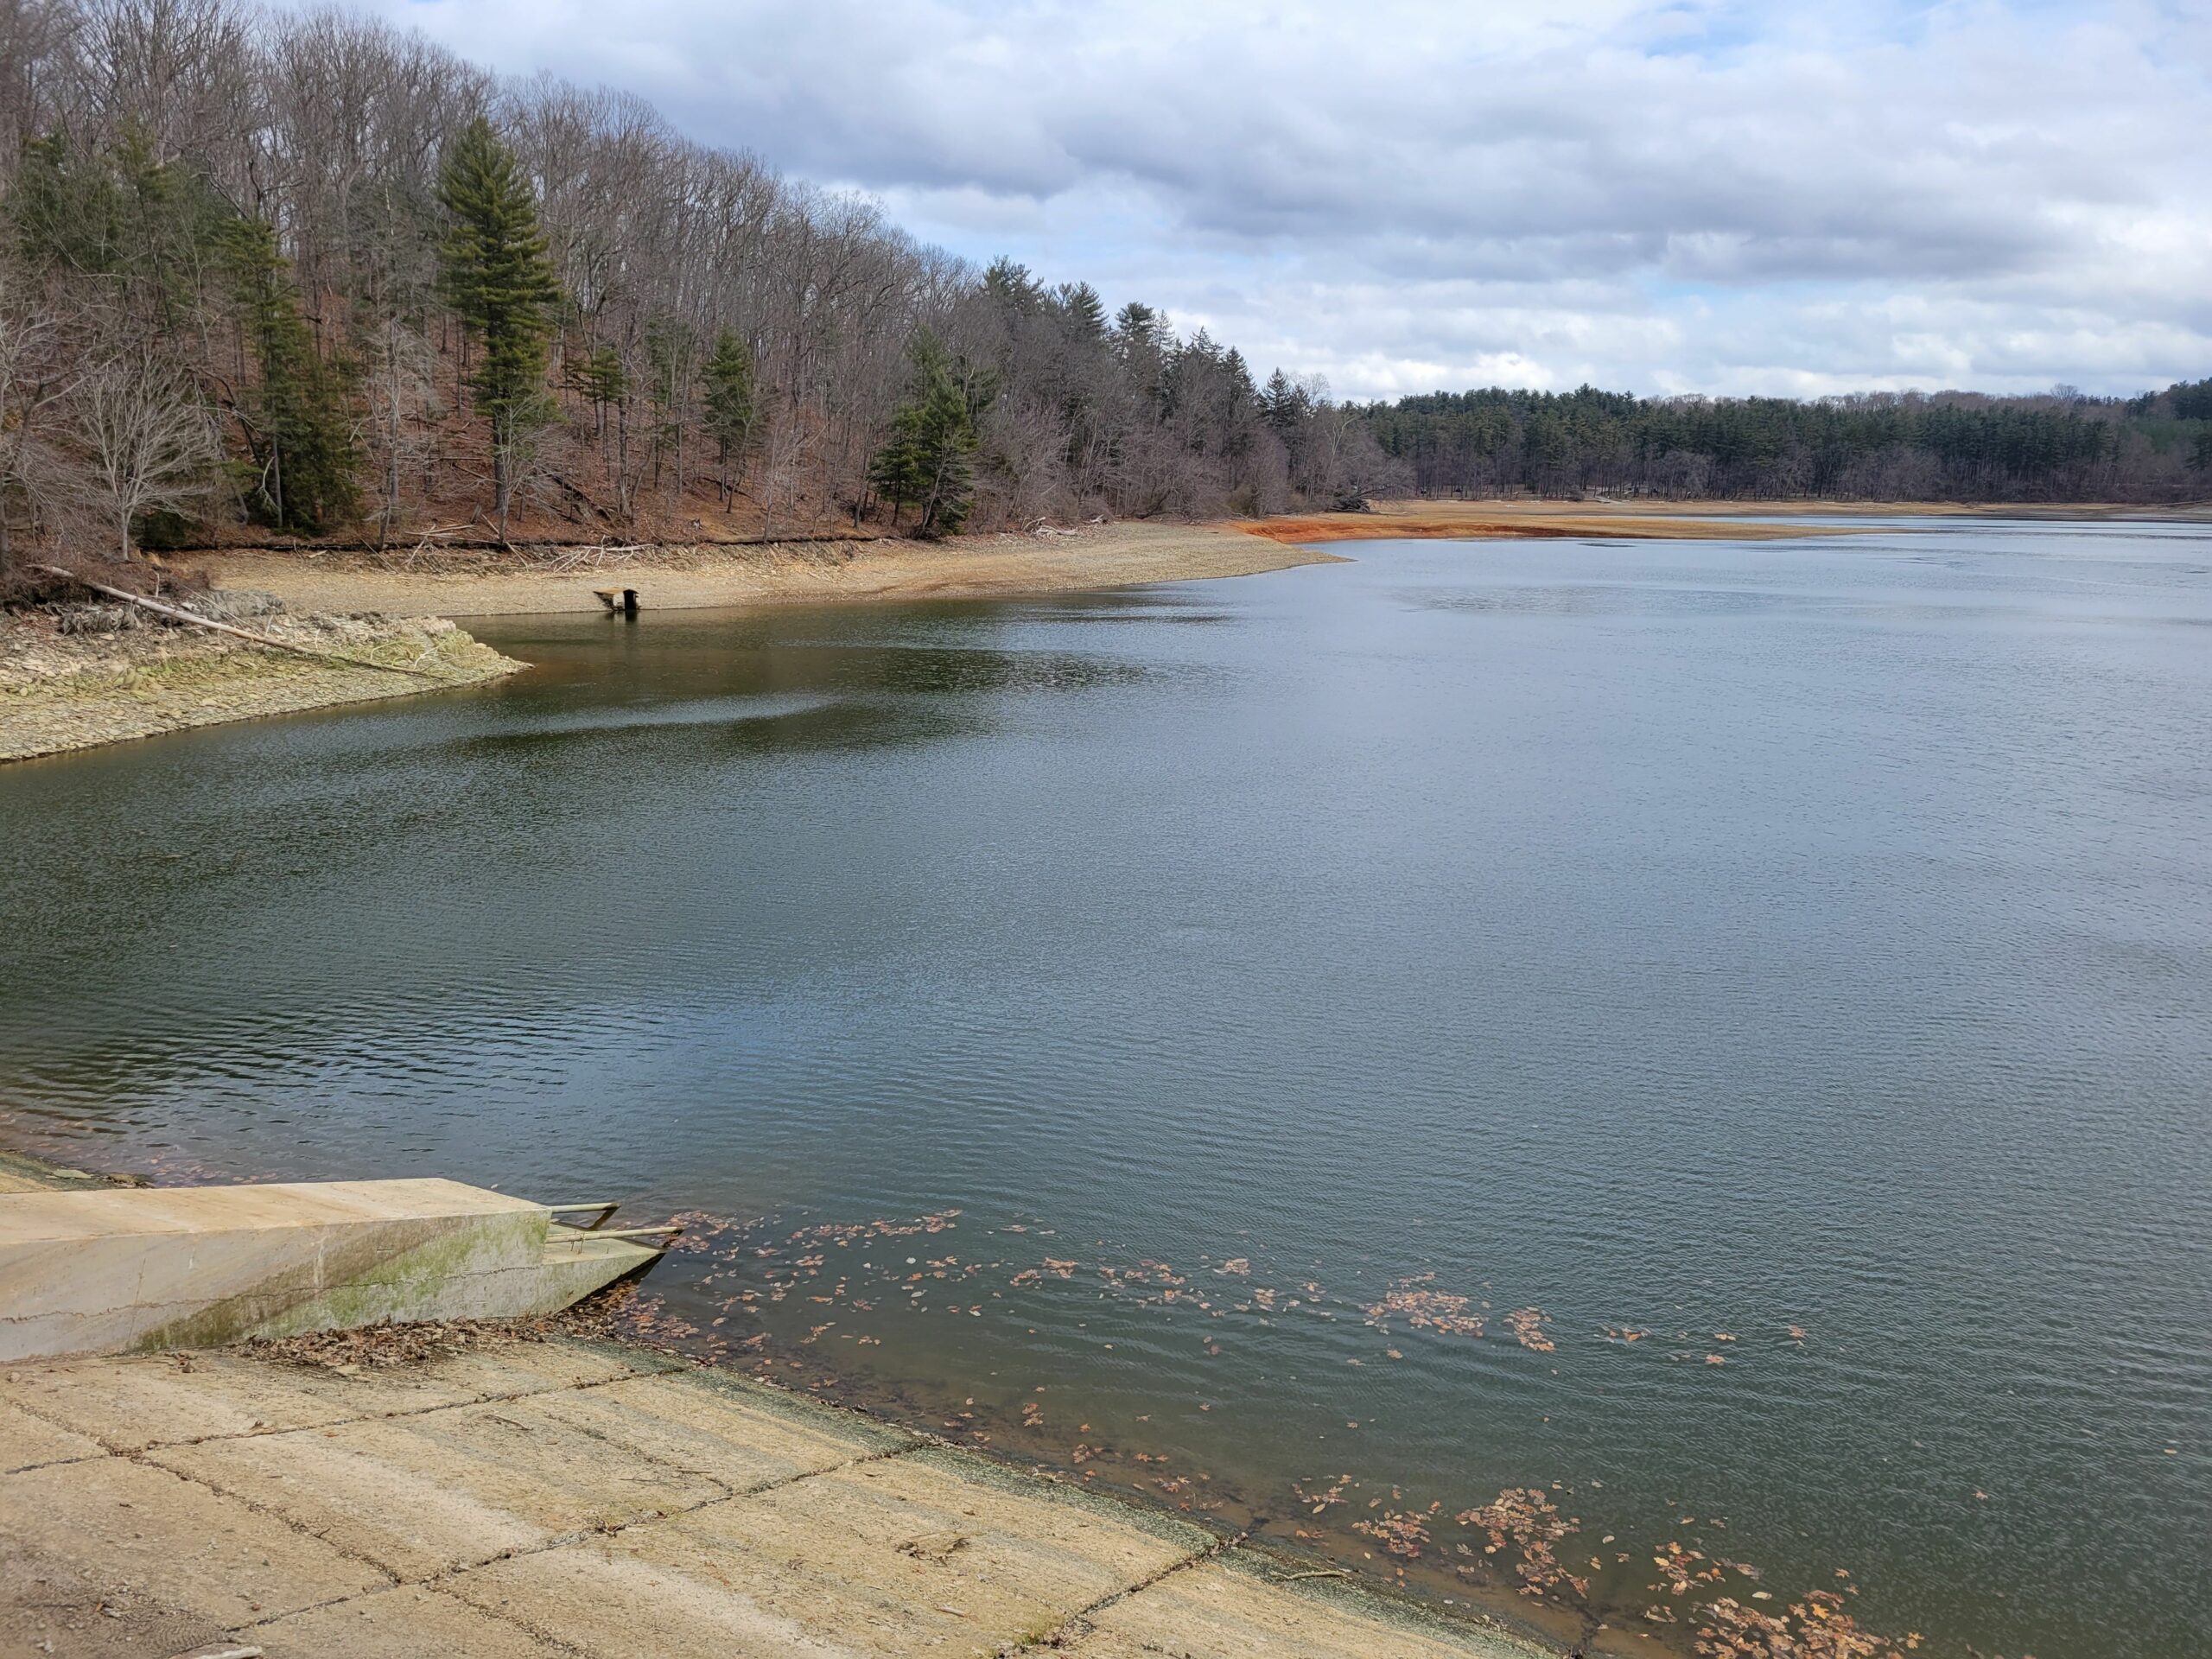 The Lake Williams Reservoir pool level is being lowered in preparation for the dam construction work that is scheduled to start in April of 2022.